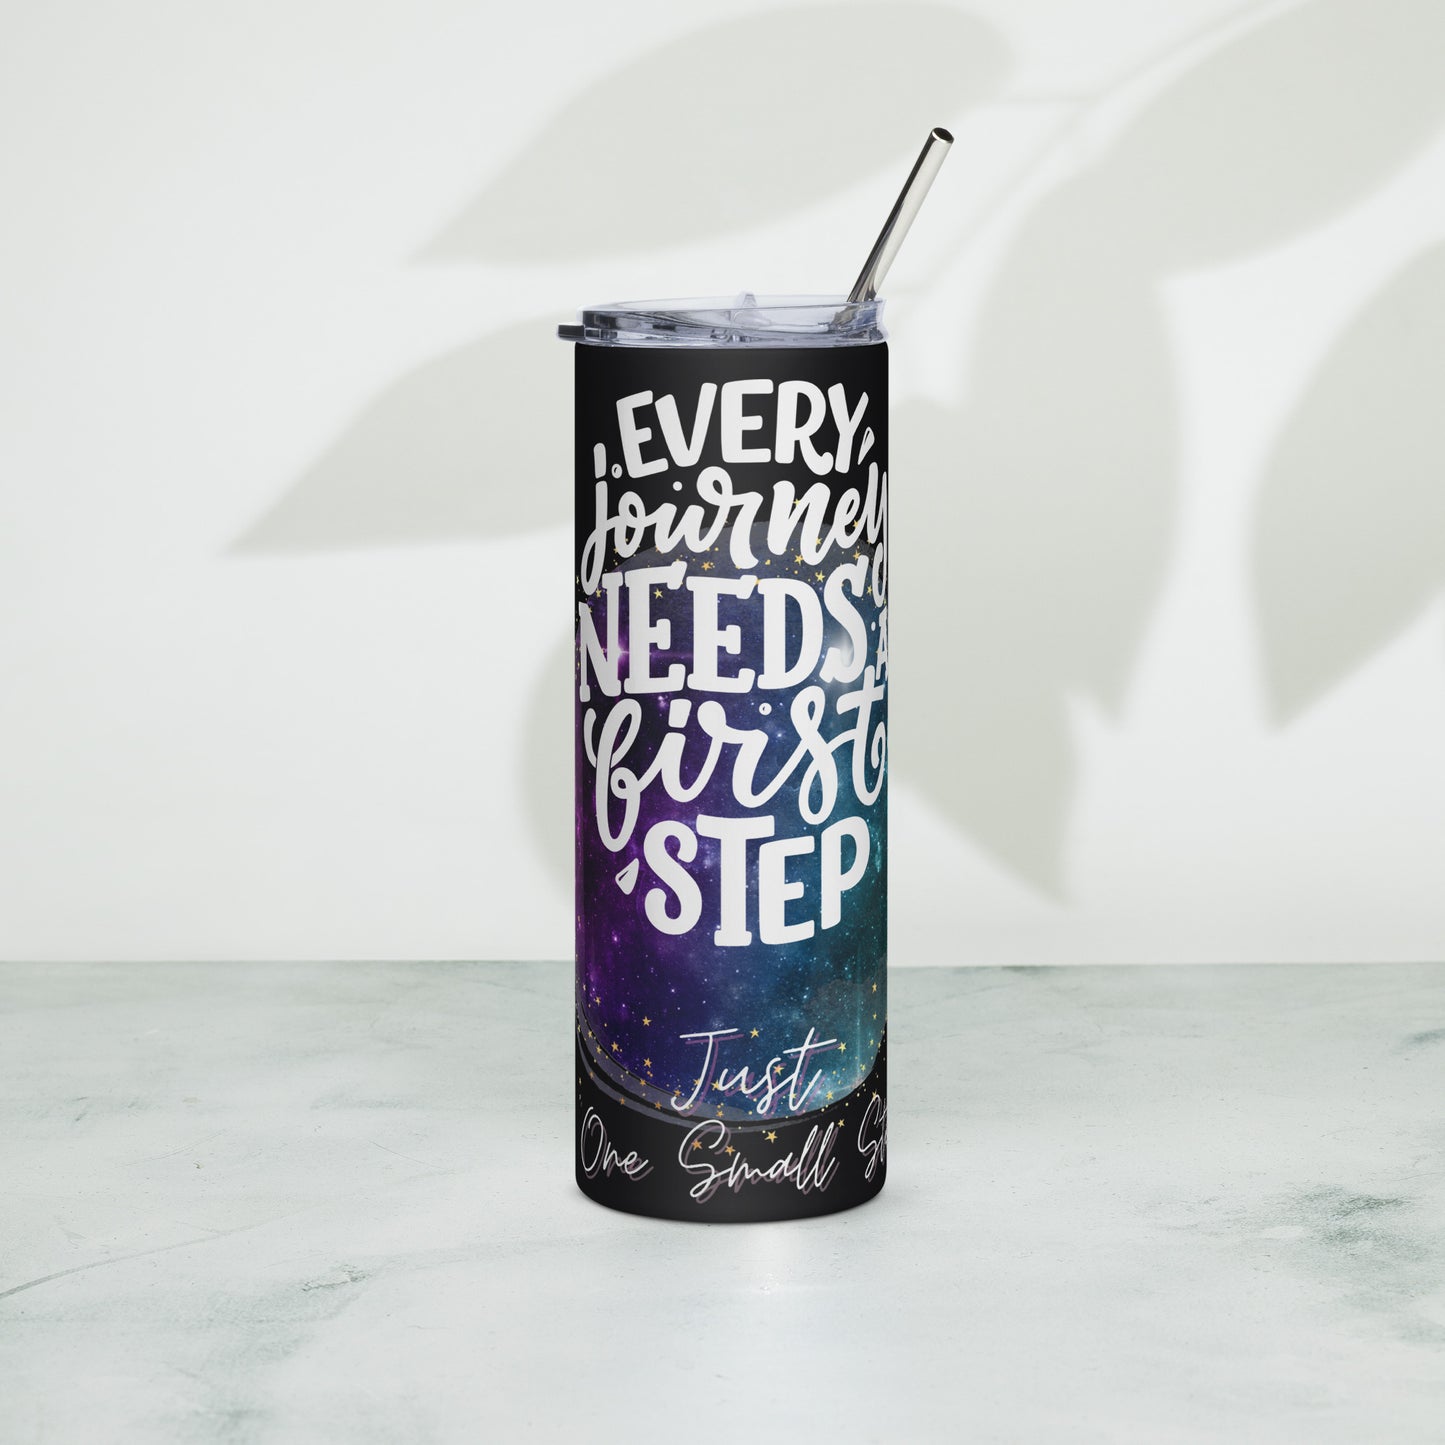 Every Journey Starts with One Small Step :  Stainless steel tumbler